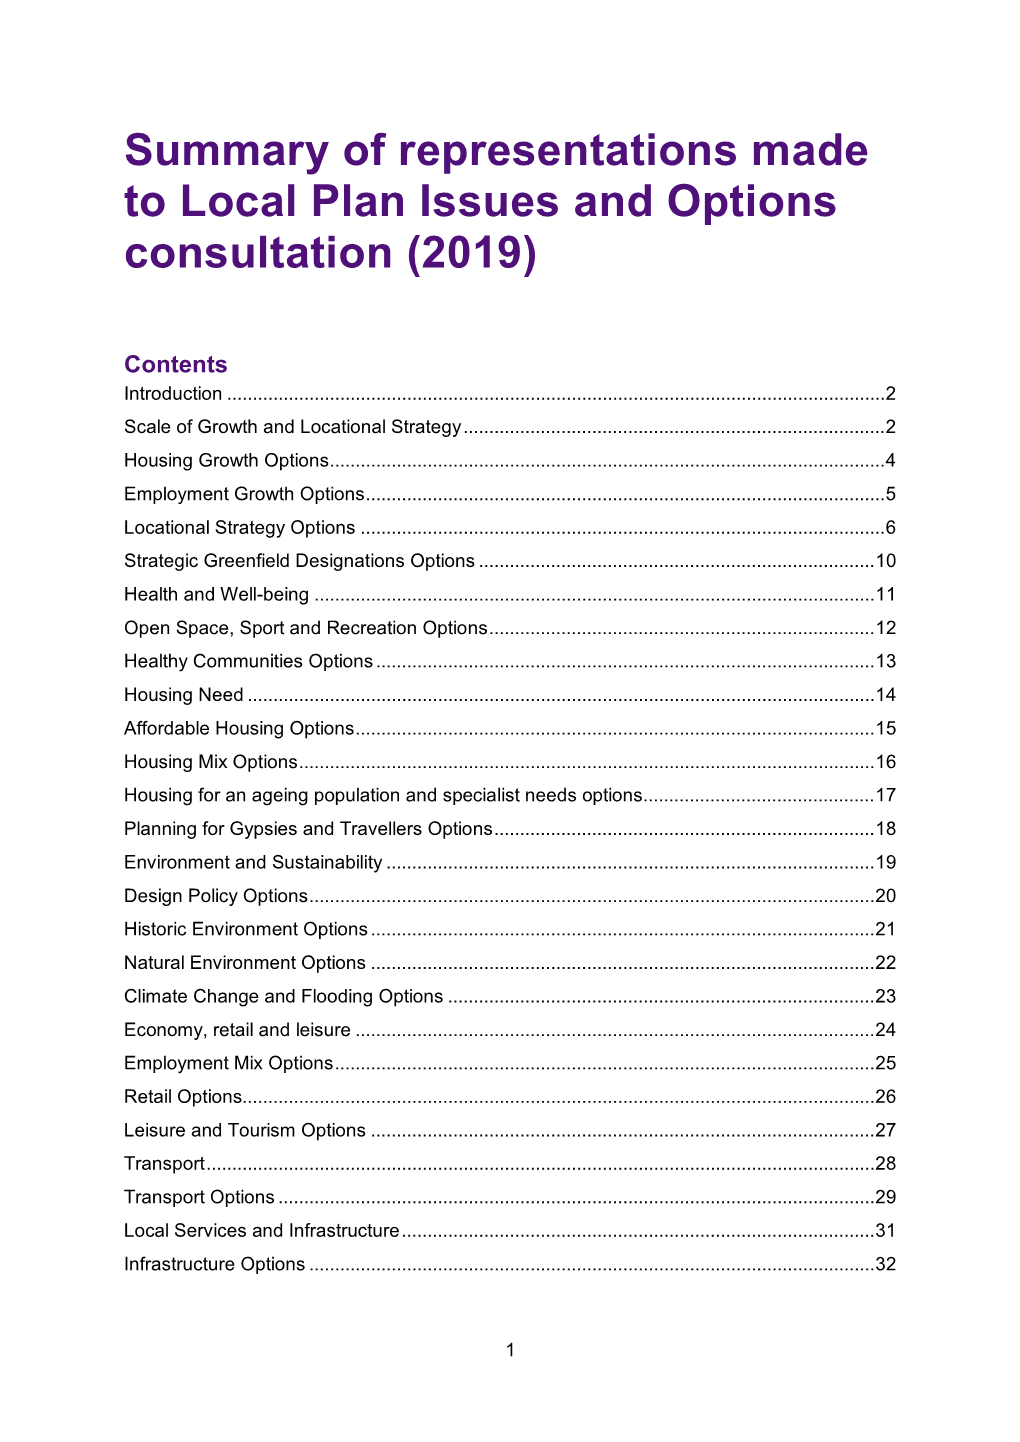 Summary of Representations Made to Local Plan Issues and Options Consultation (2019)